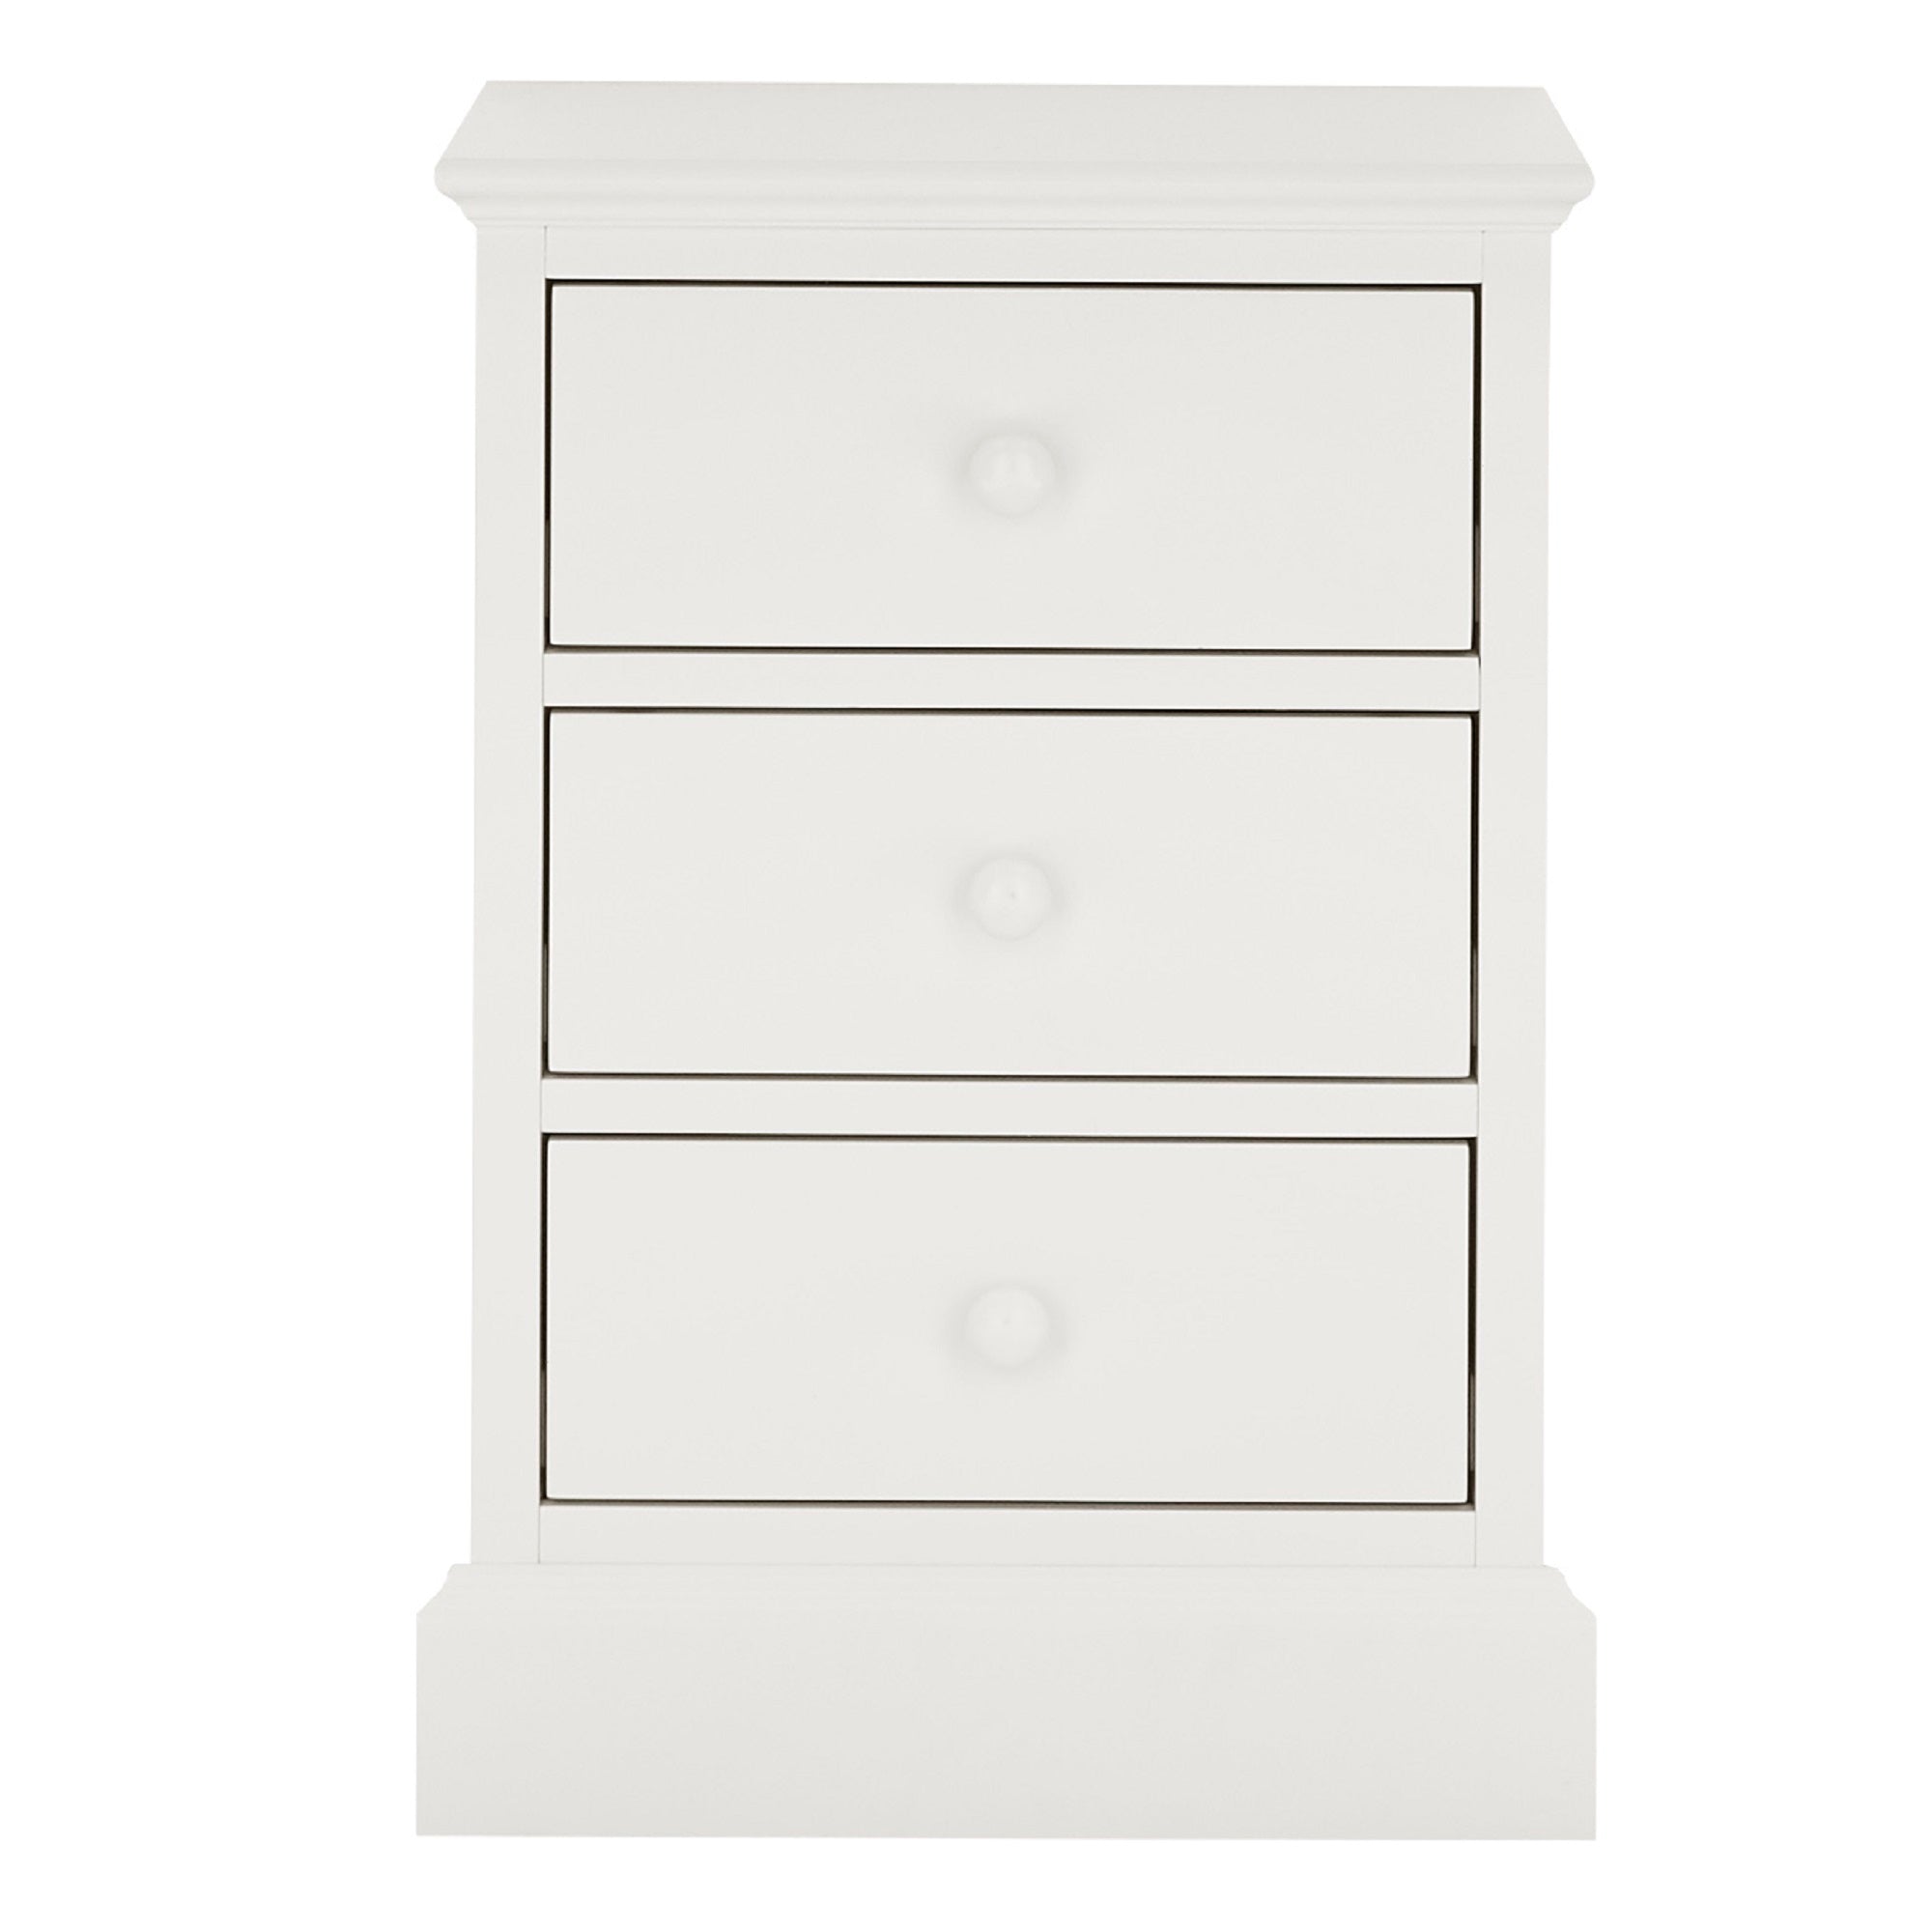 Ashby White 3 Drawer Bedside Table